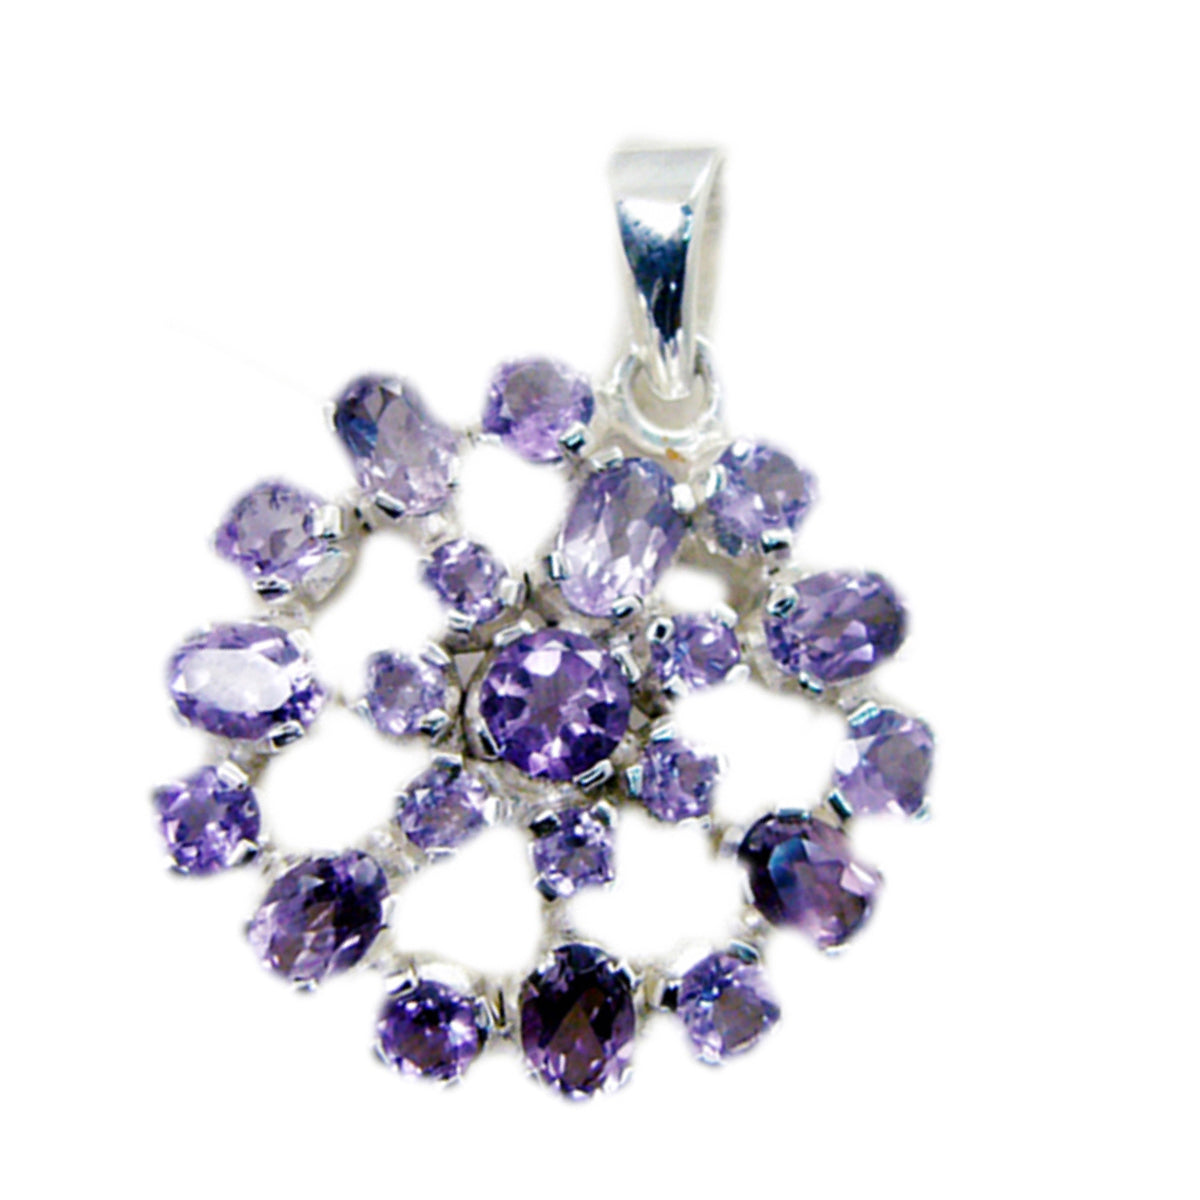 Riyo Delightful Gems Multi Faceted Purple Amethyst Silver Pendant Gift For Boxing Day